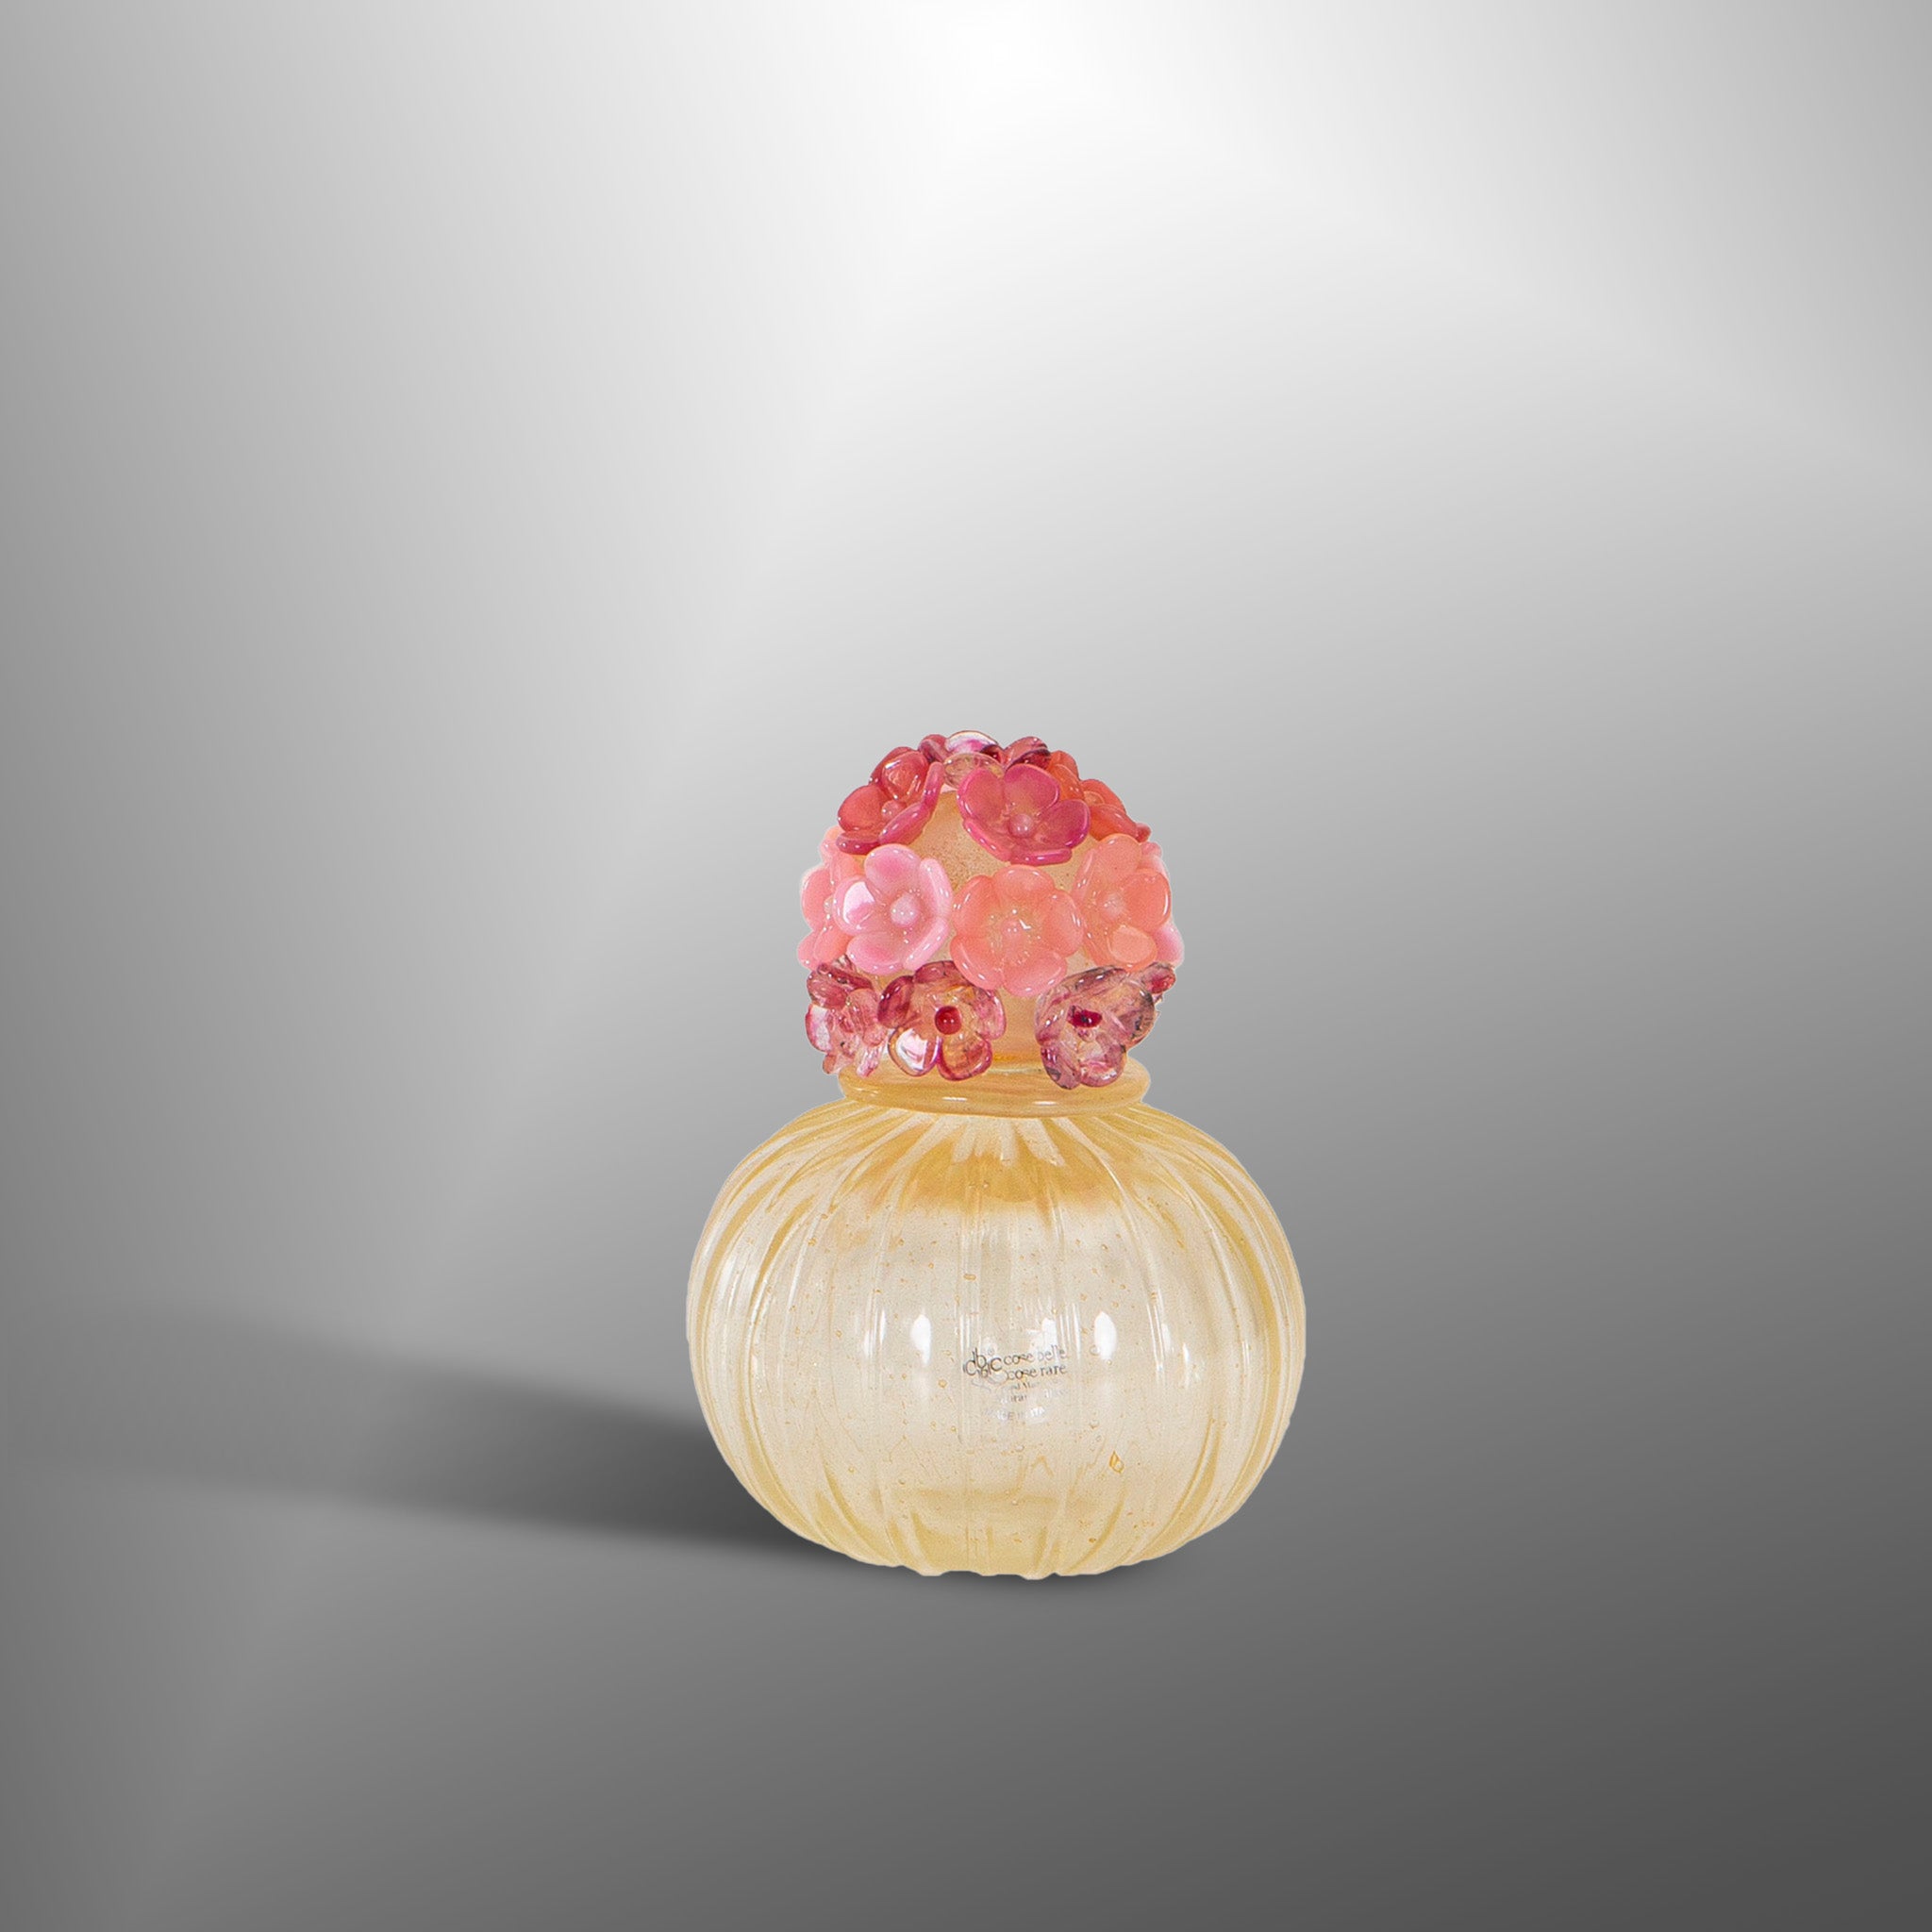 Ambient parfume bottle in gold with flowers